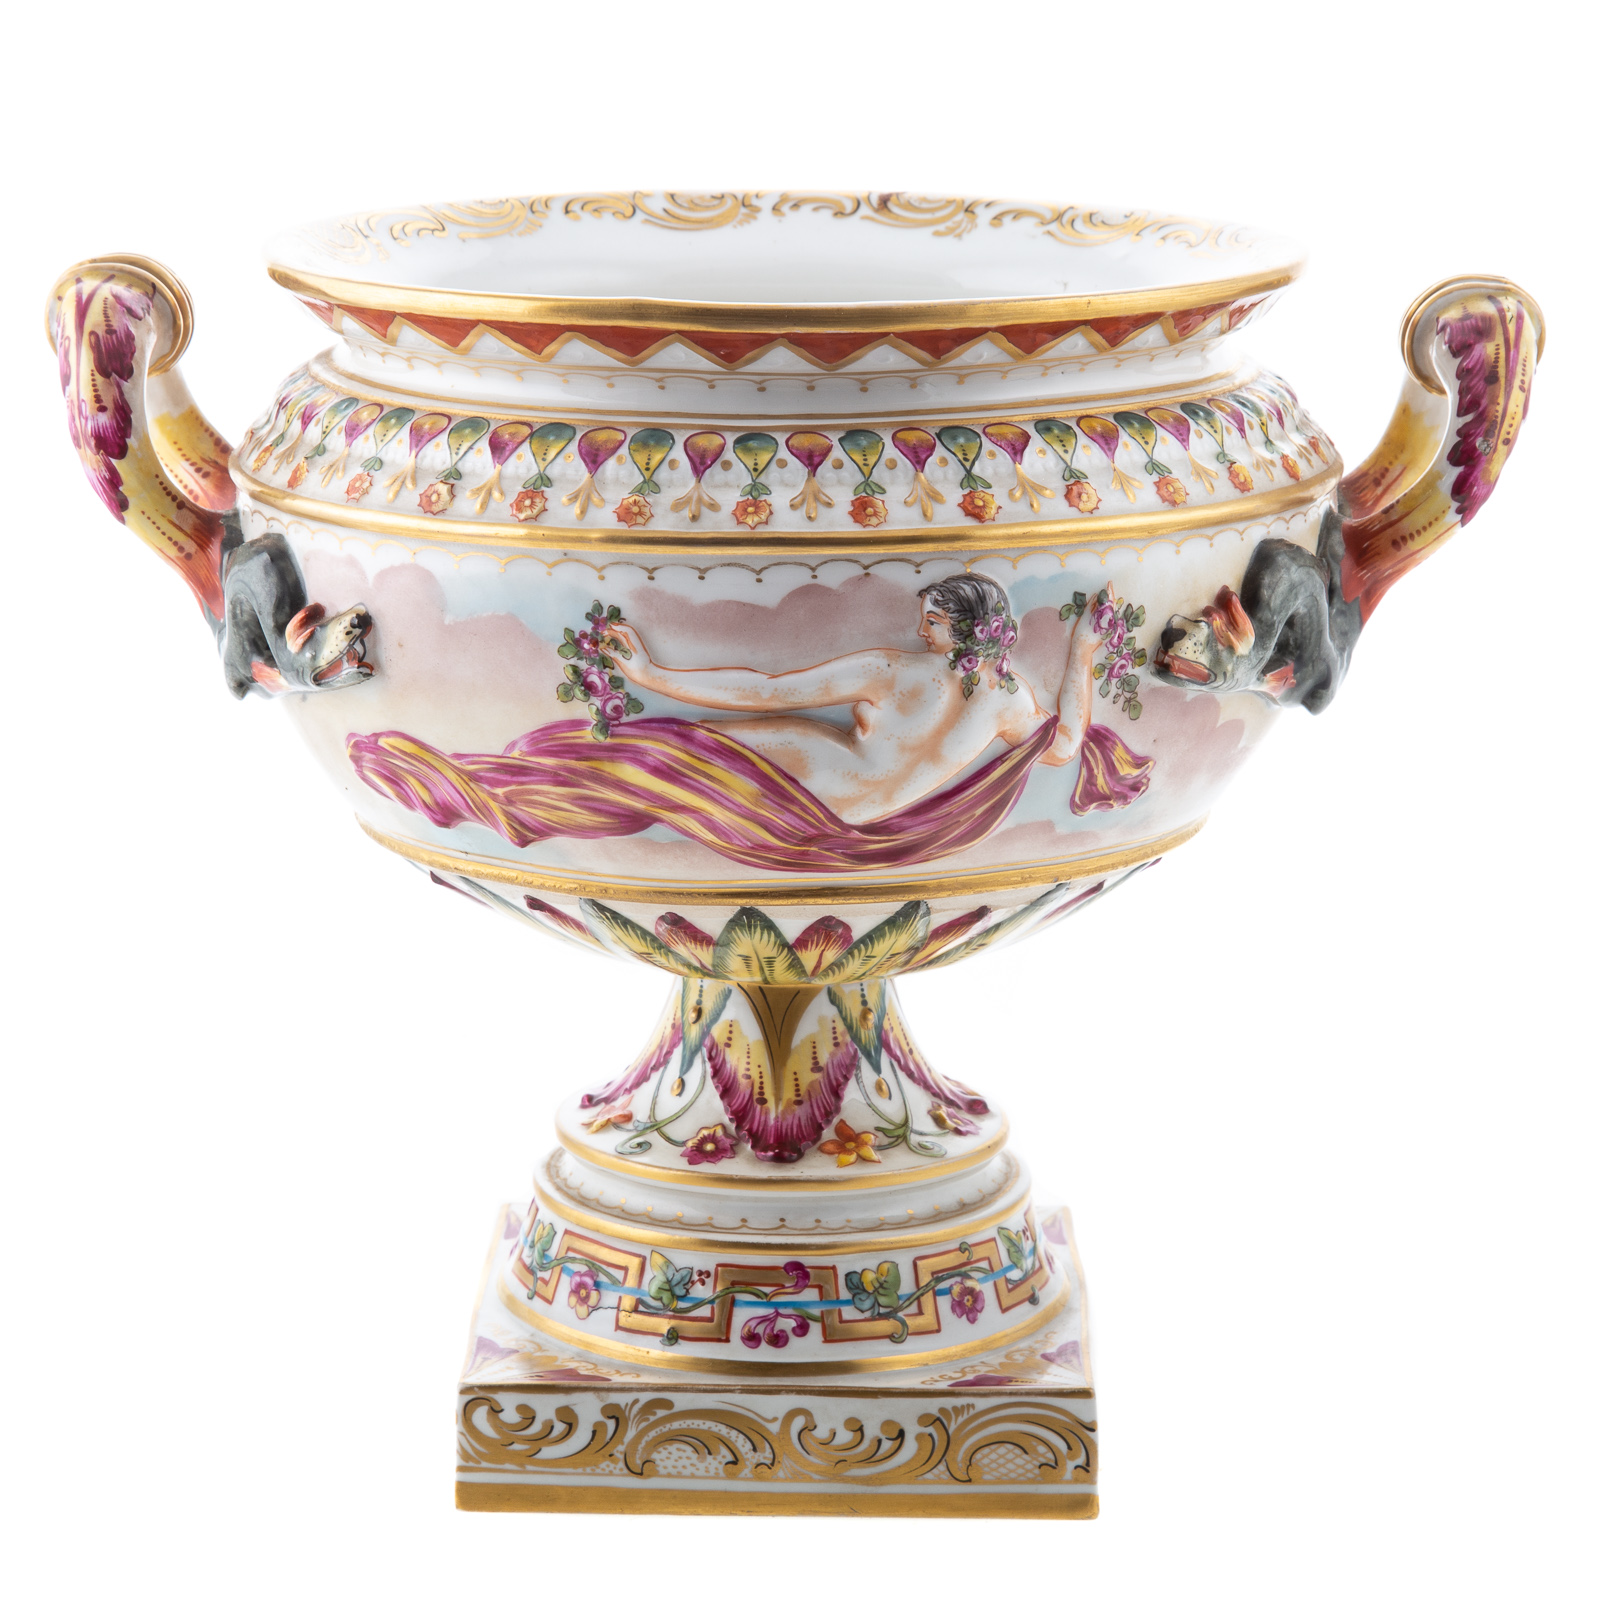 CAPODIMONTE PORCELAIN URN First